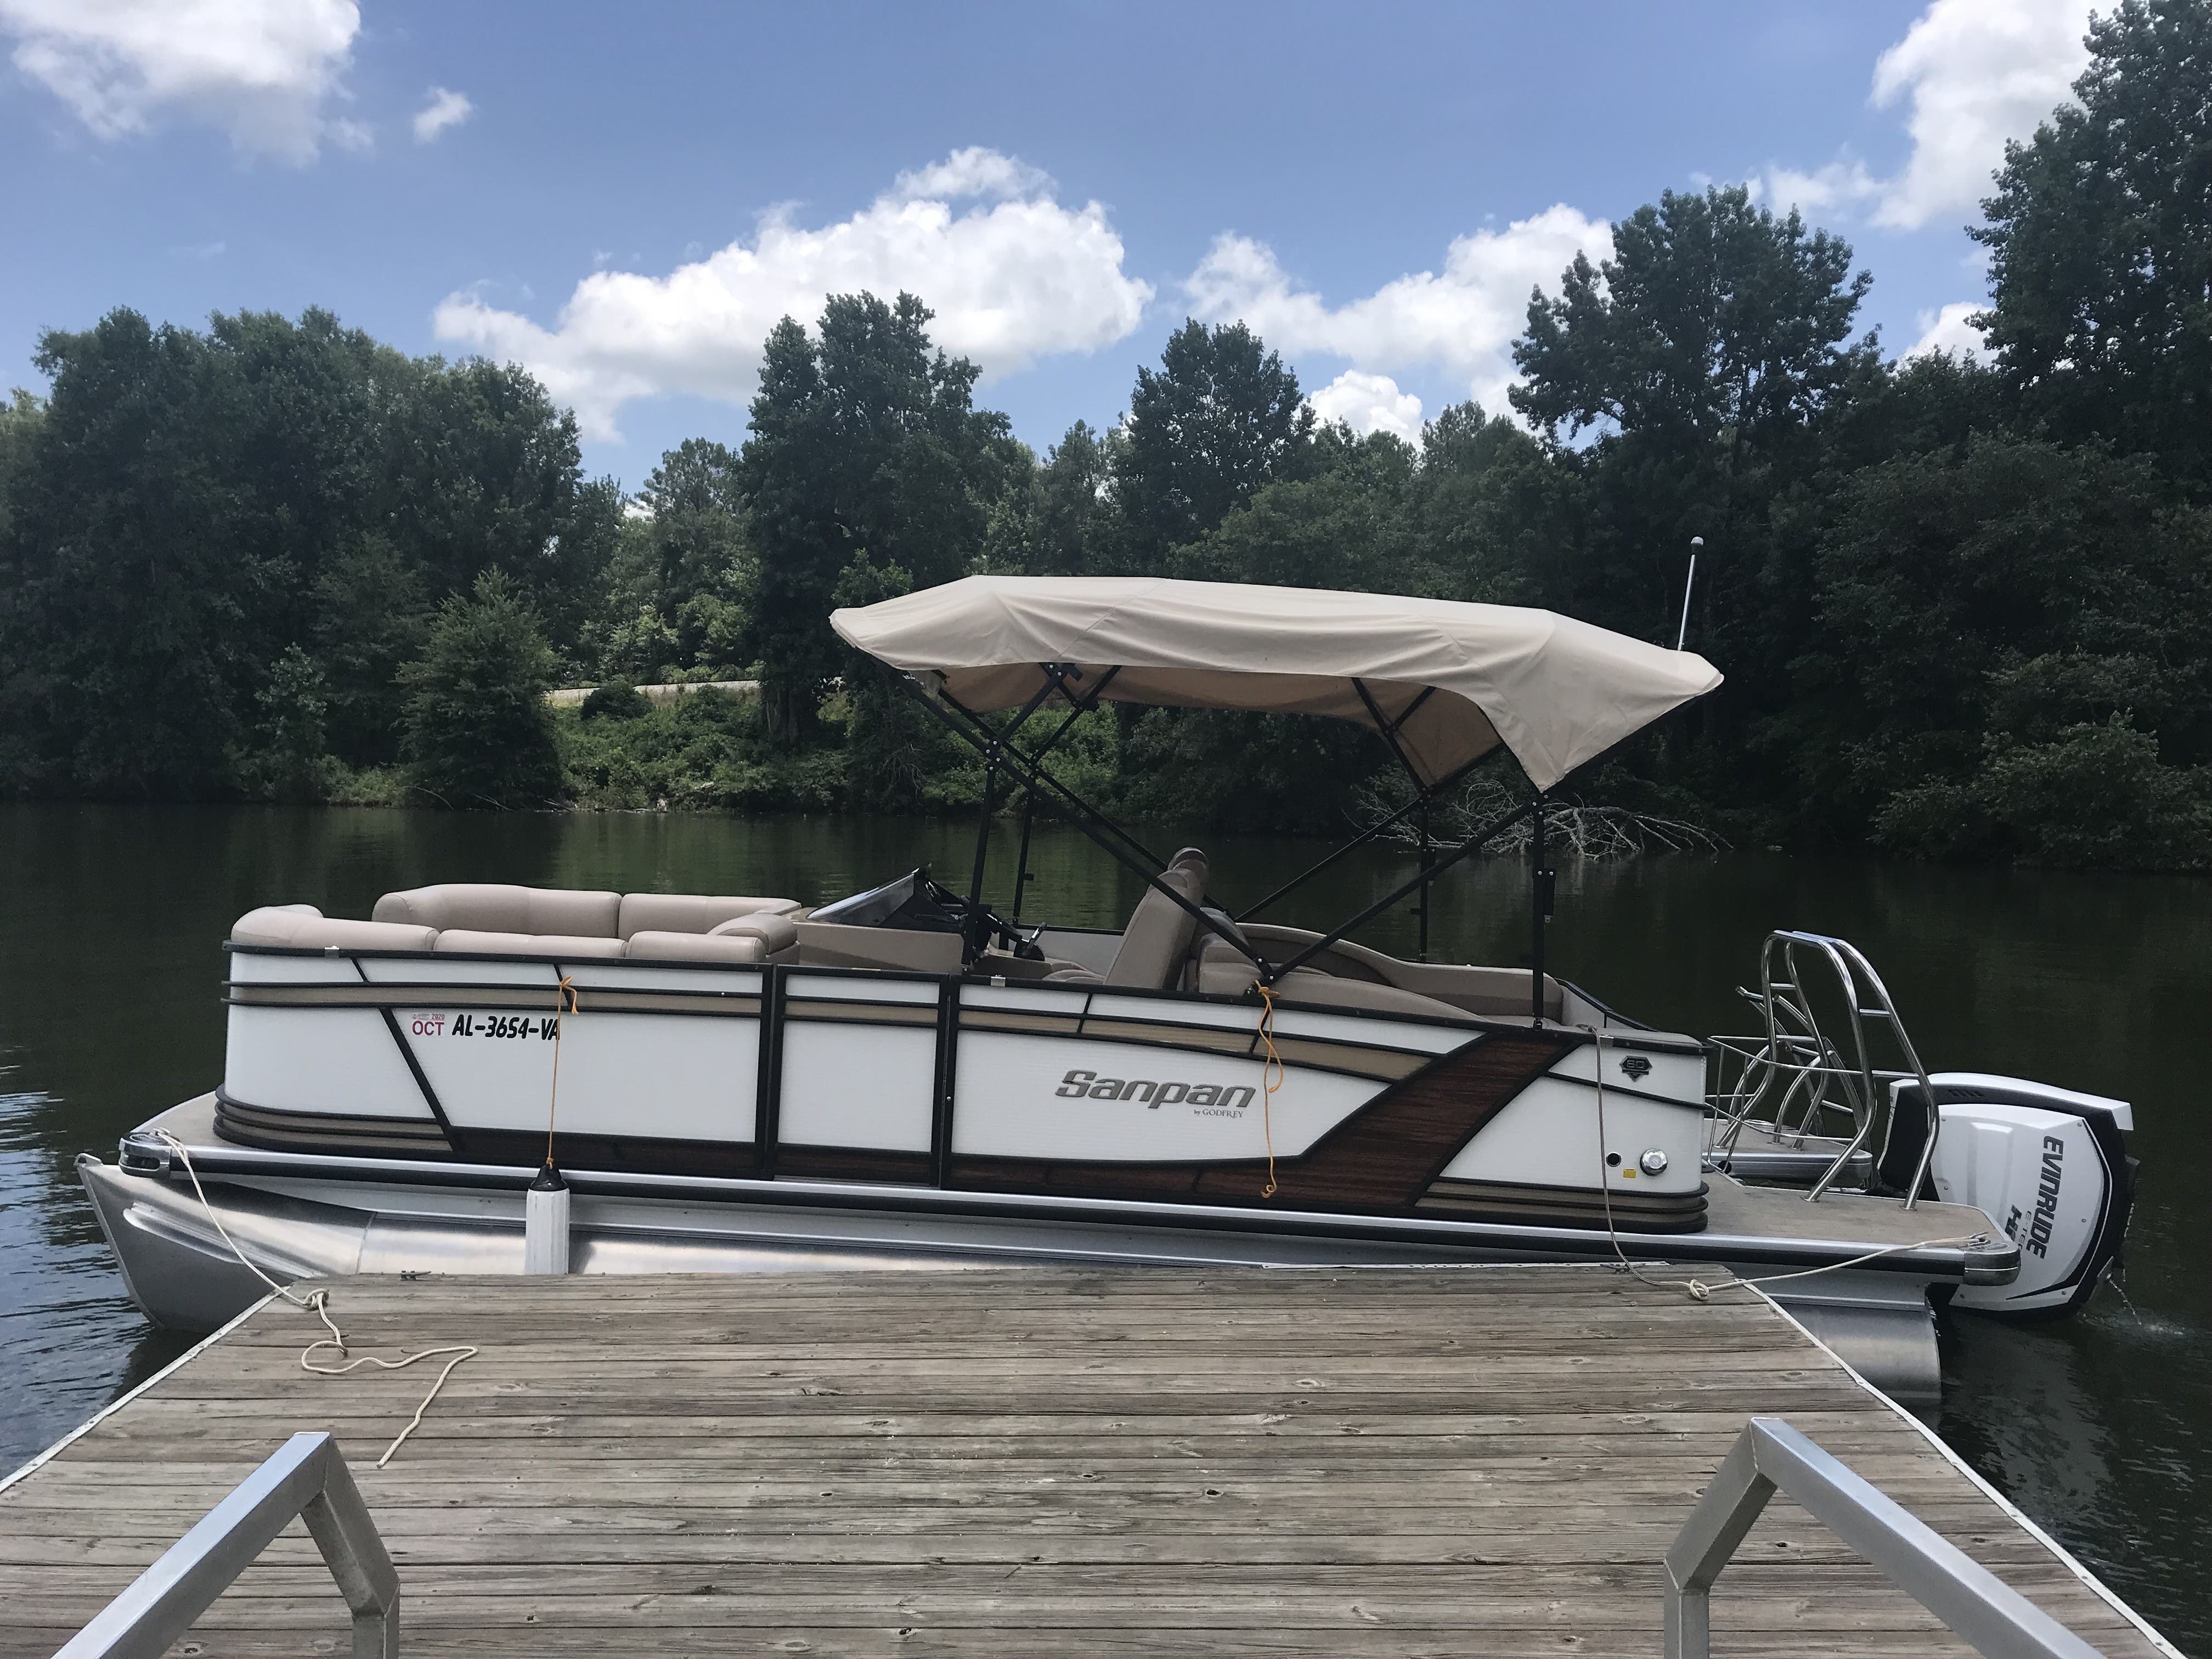 Used Jon Boats For Sale In Alabama / New and Used Blazer Bay Boats For Sale in Stapleton near ... : These yachts for sale in the uk generally range in.